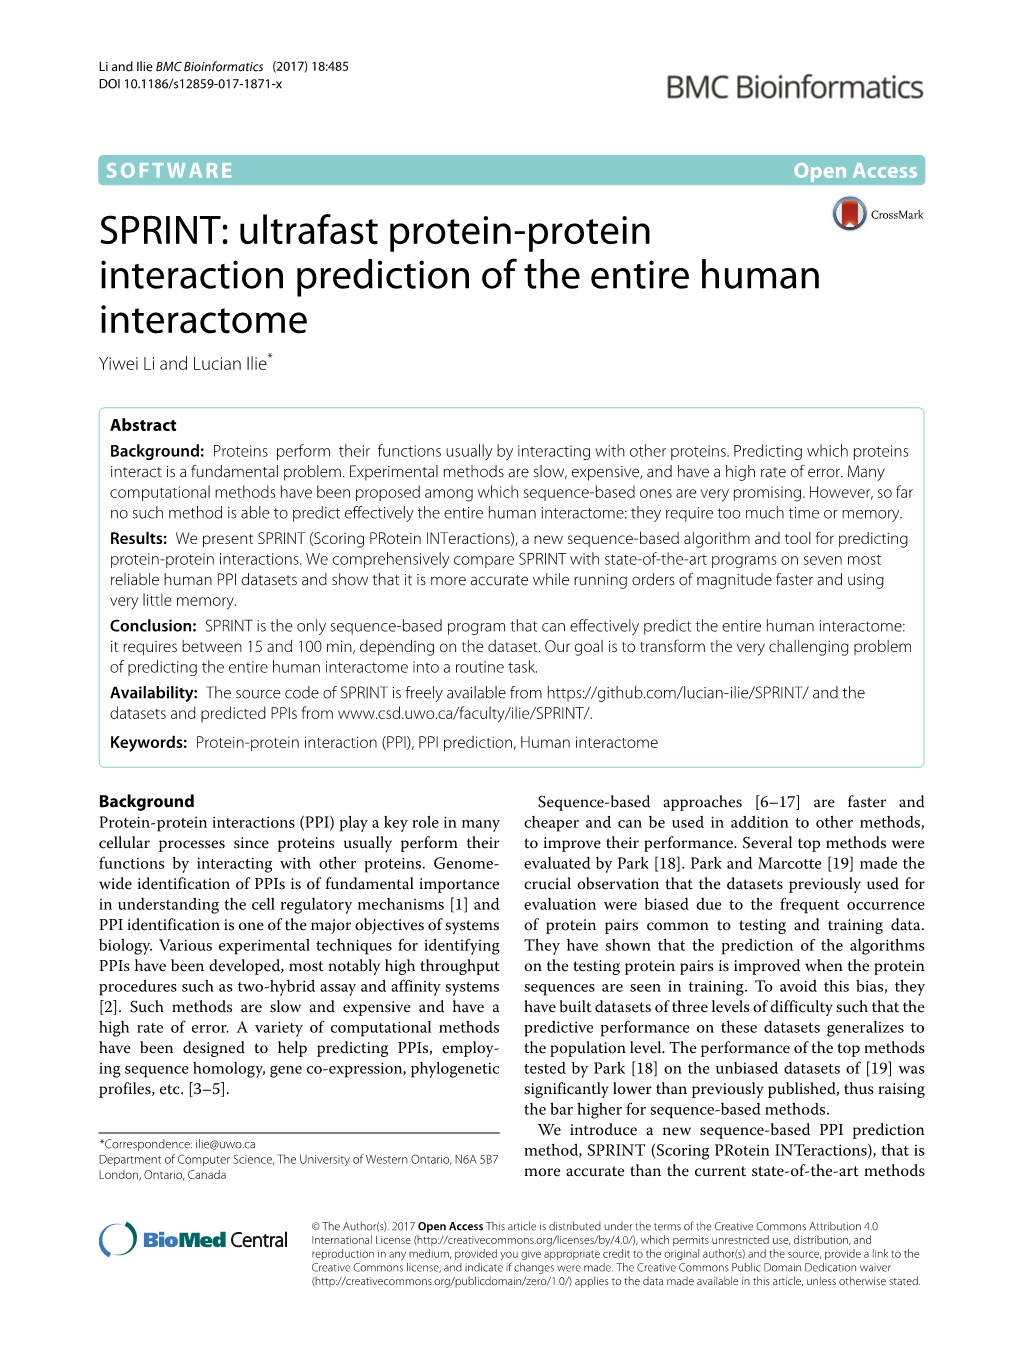 SPRINT: Ultrafast Protein-Protein Interaction Prediction of the Entire Human Interactome Yiwei Li and Lucian Ilie*